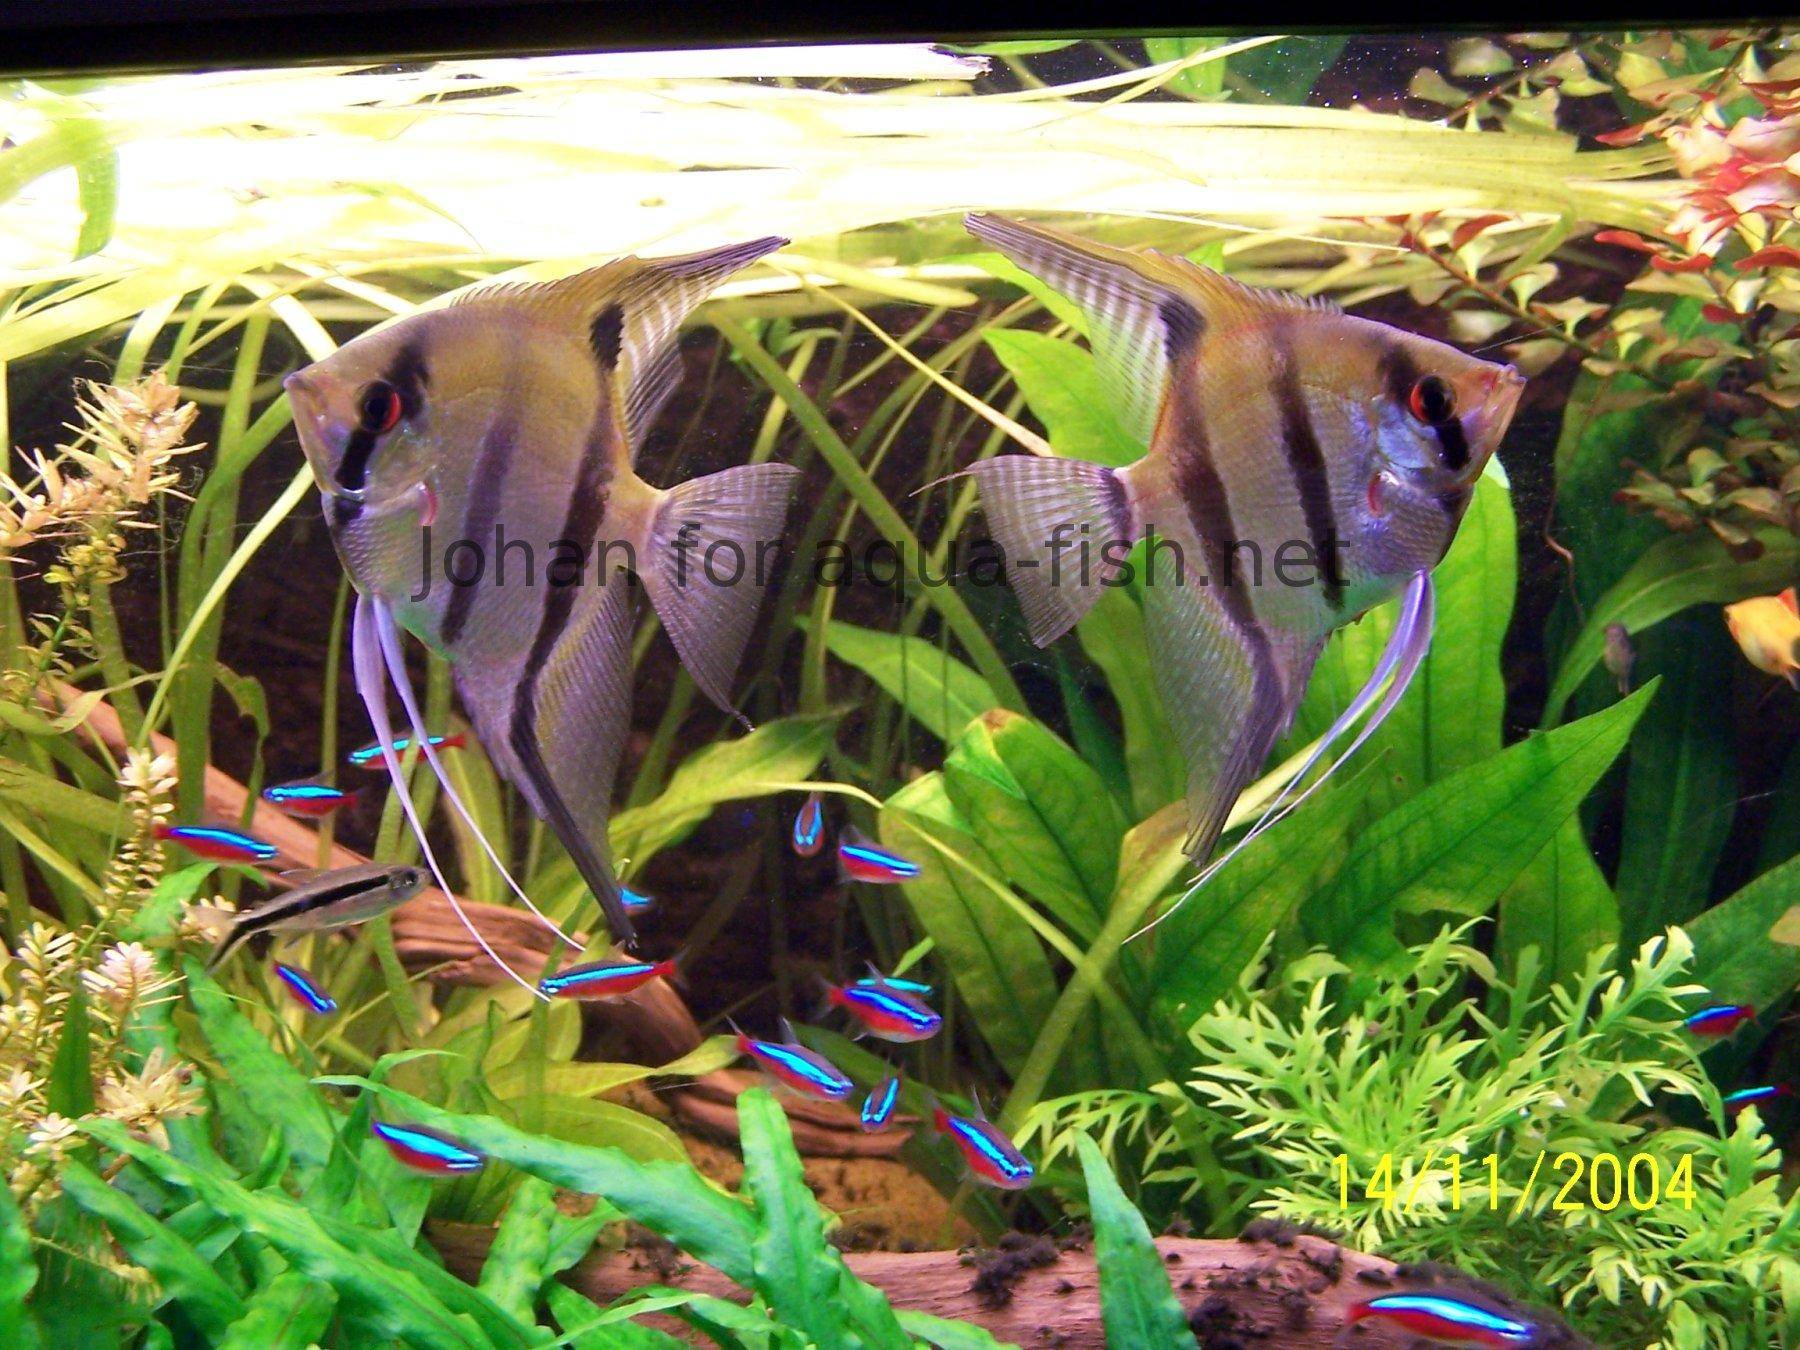 Freshwater Angelfish - A guide and forums on care